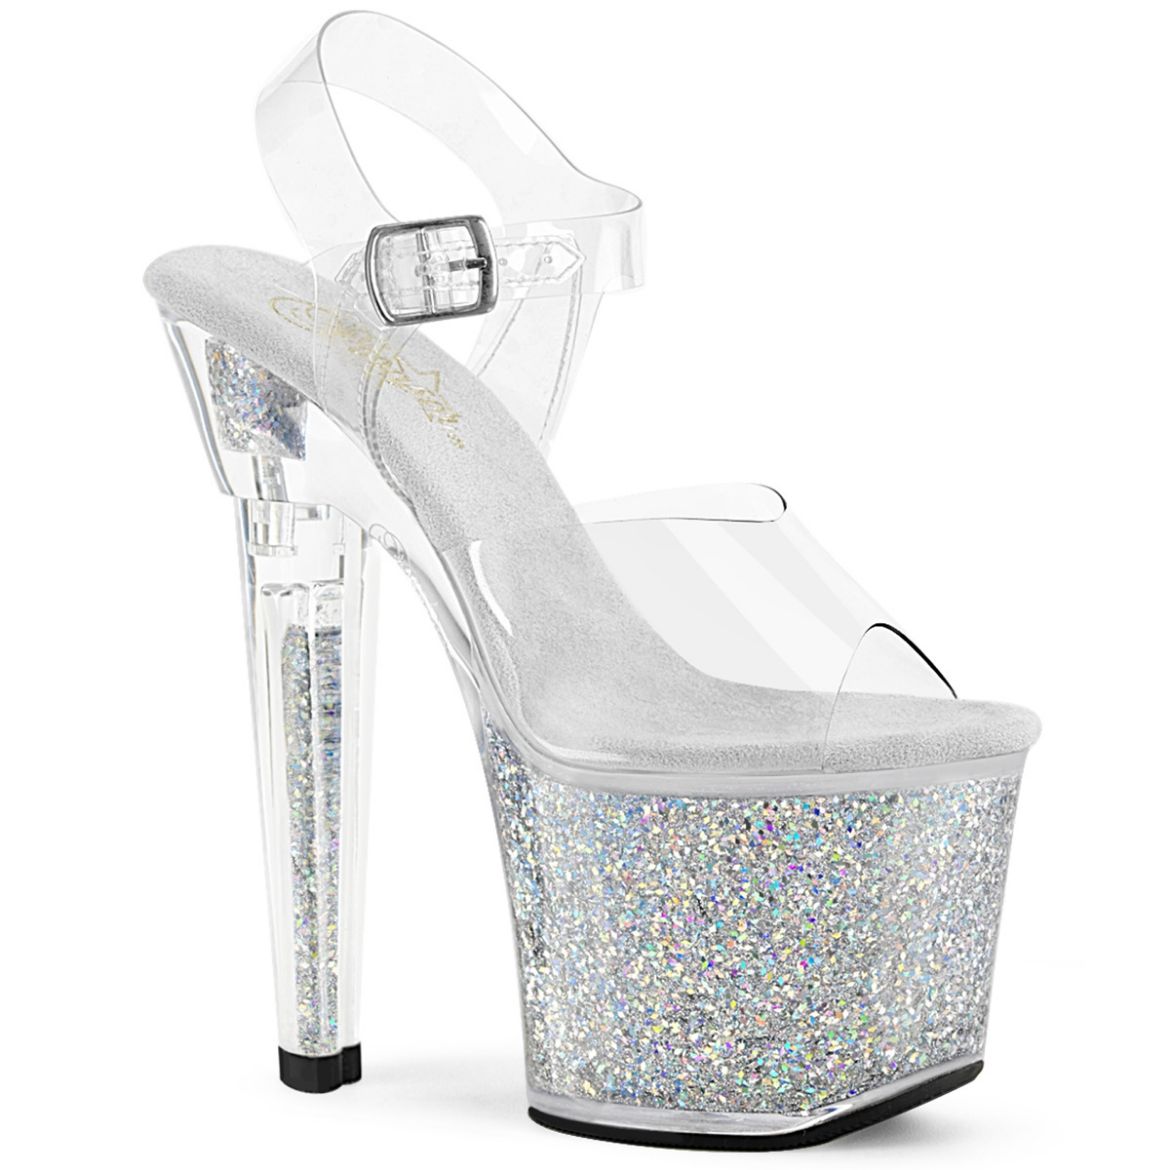 Product image of Pleaser LOVESICK-708SG Clr/Slv Multi Iridescent Glitters 7 Inch Heel 3 1/4 Inch PF Ankle Strap Sandal w/Iridescent Glitters